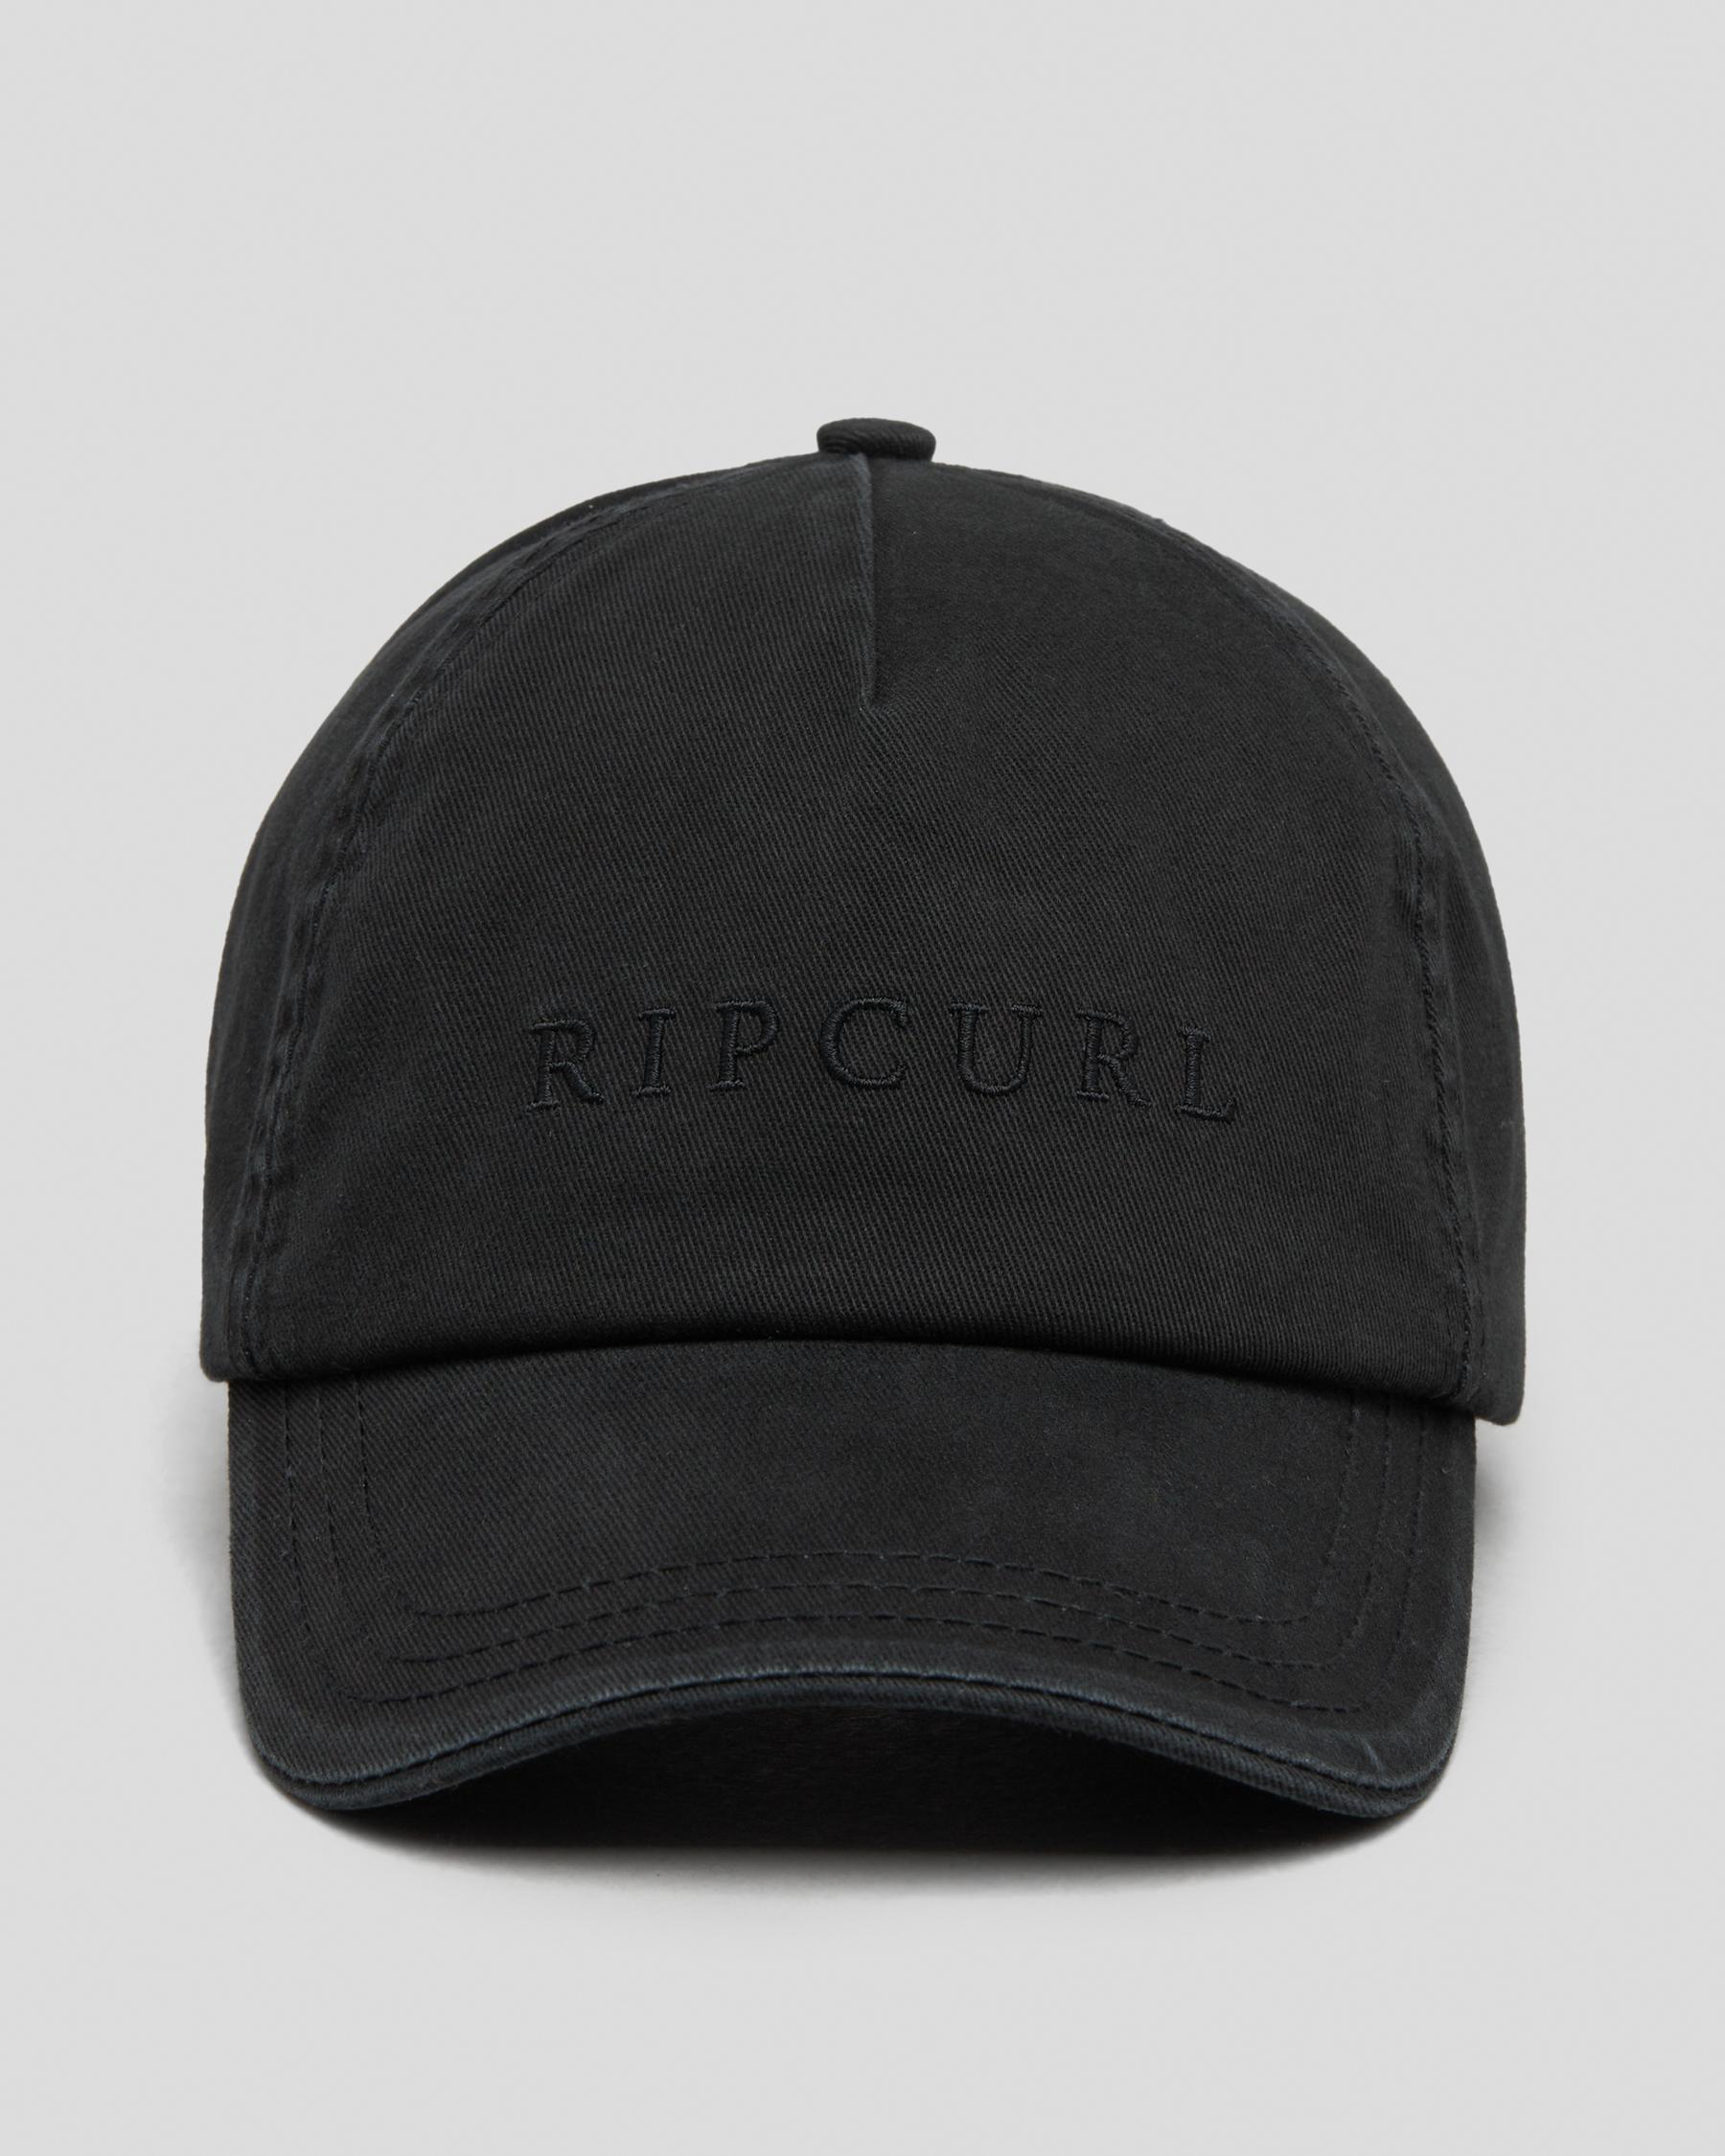 Rip Curl Premium Surf Cap In Washed Black - Fast Shipping & Easy ...